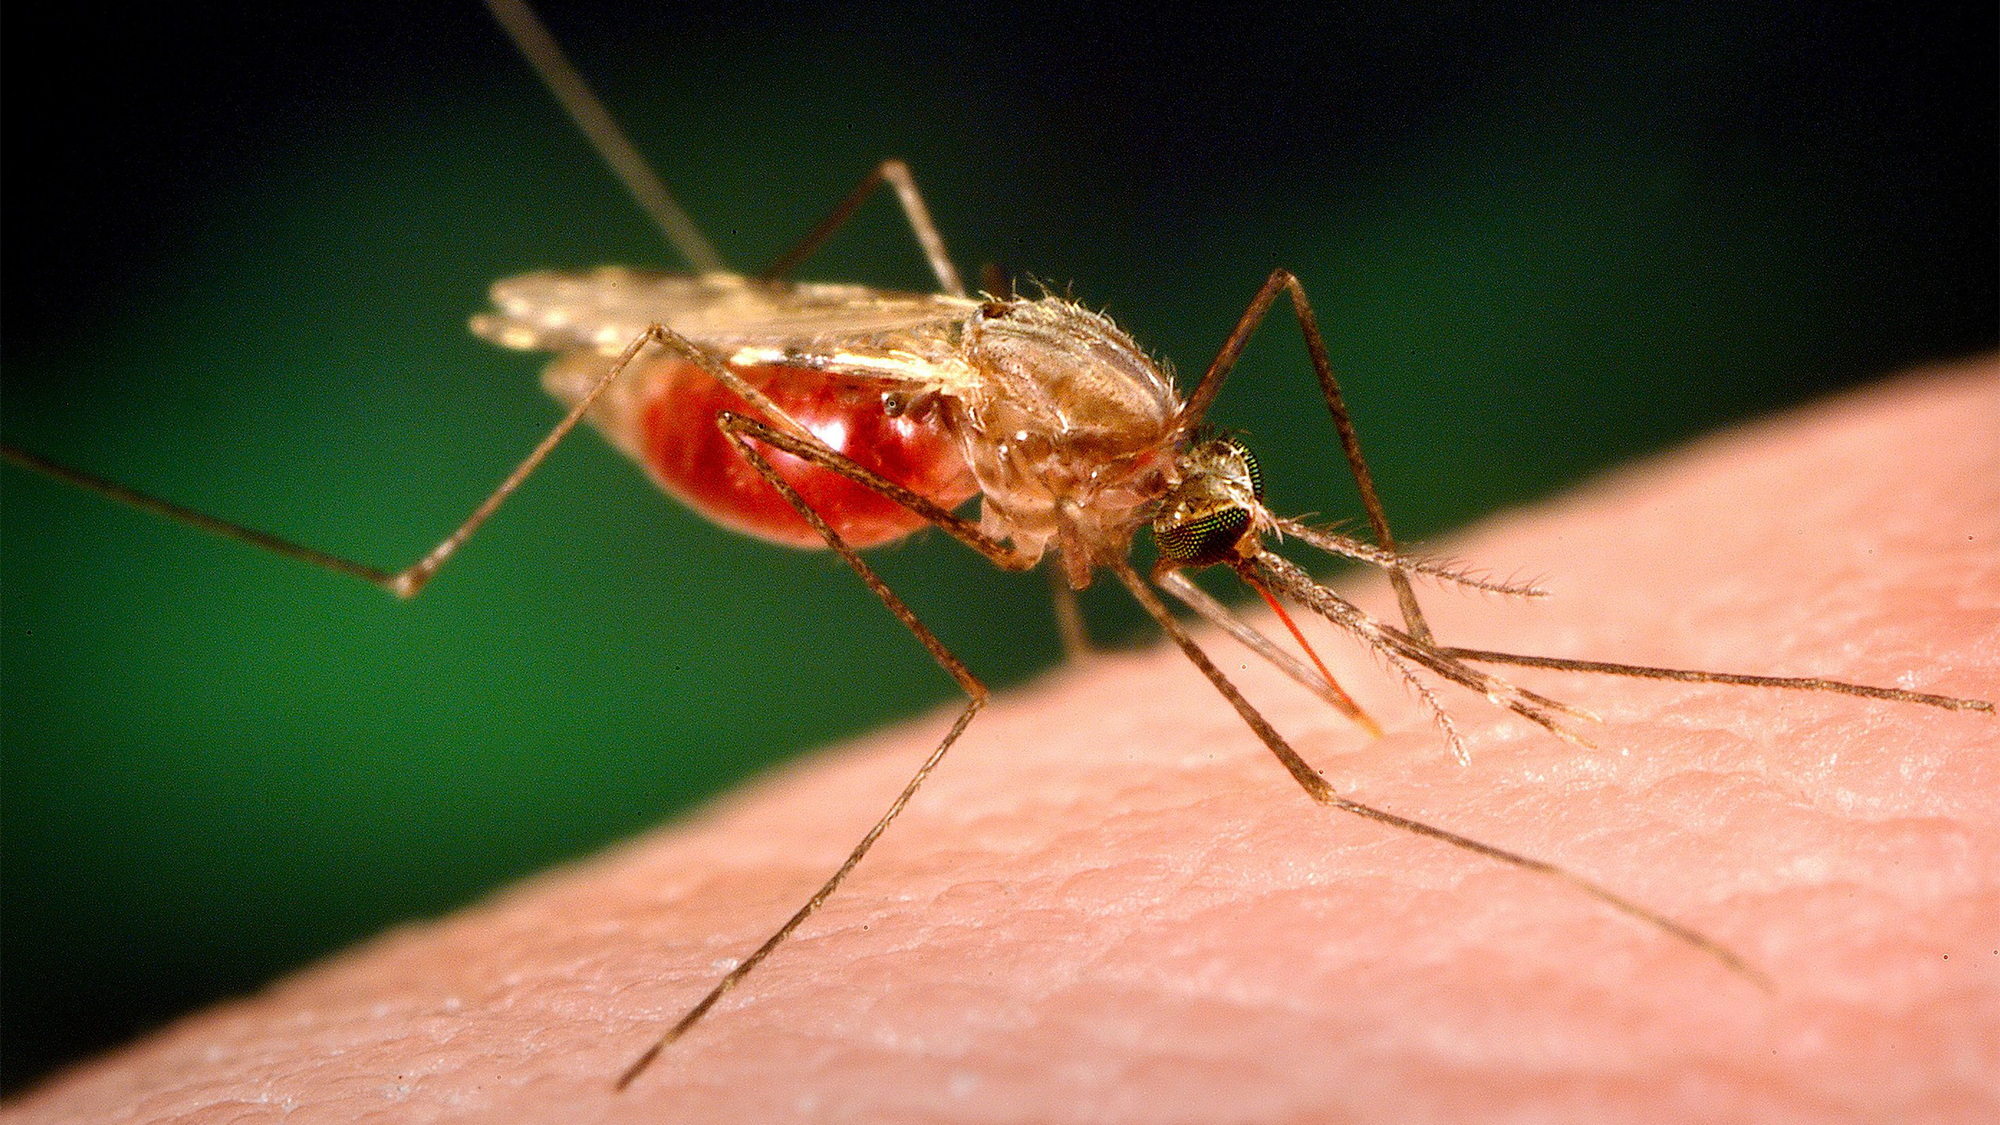 A female Anopheles funestus mosquito filled with blood prepares to bite human skin